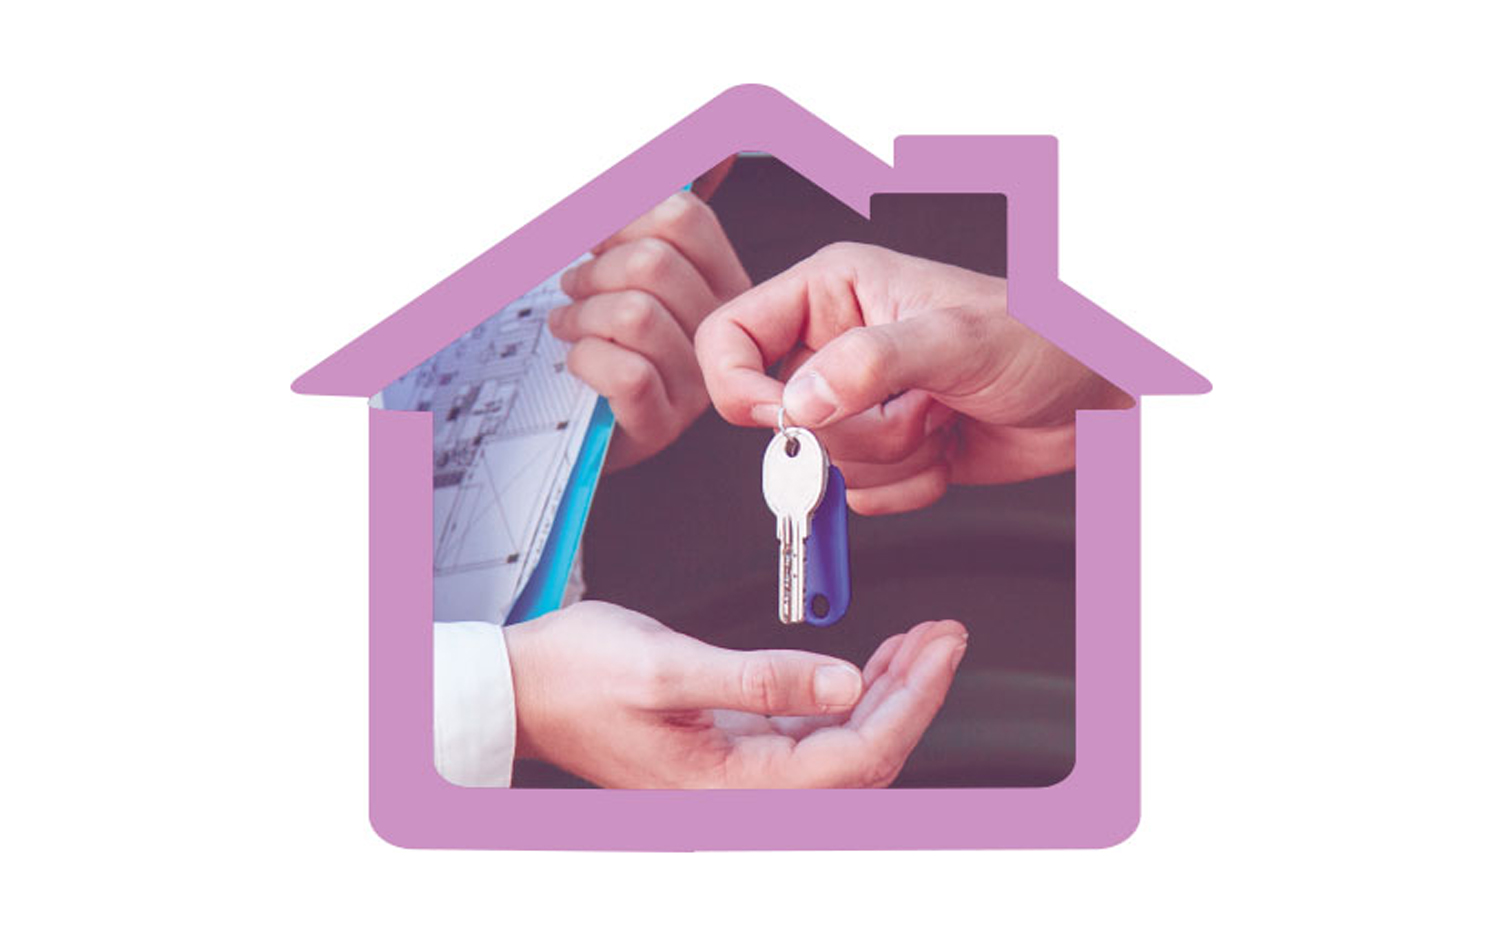 Person handing keys to another person. Image is in a border which looks like a house.